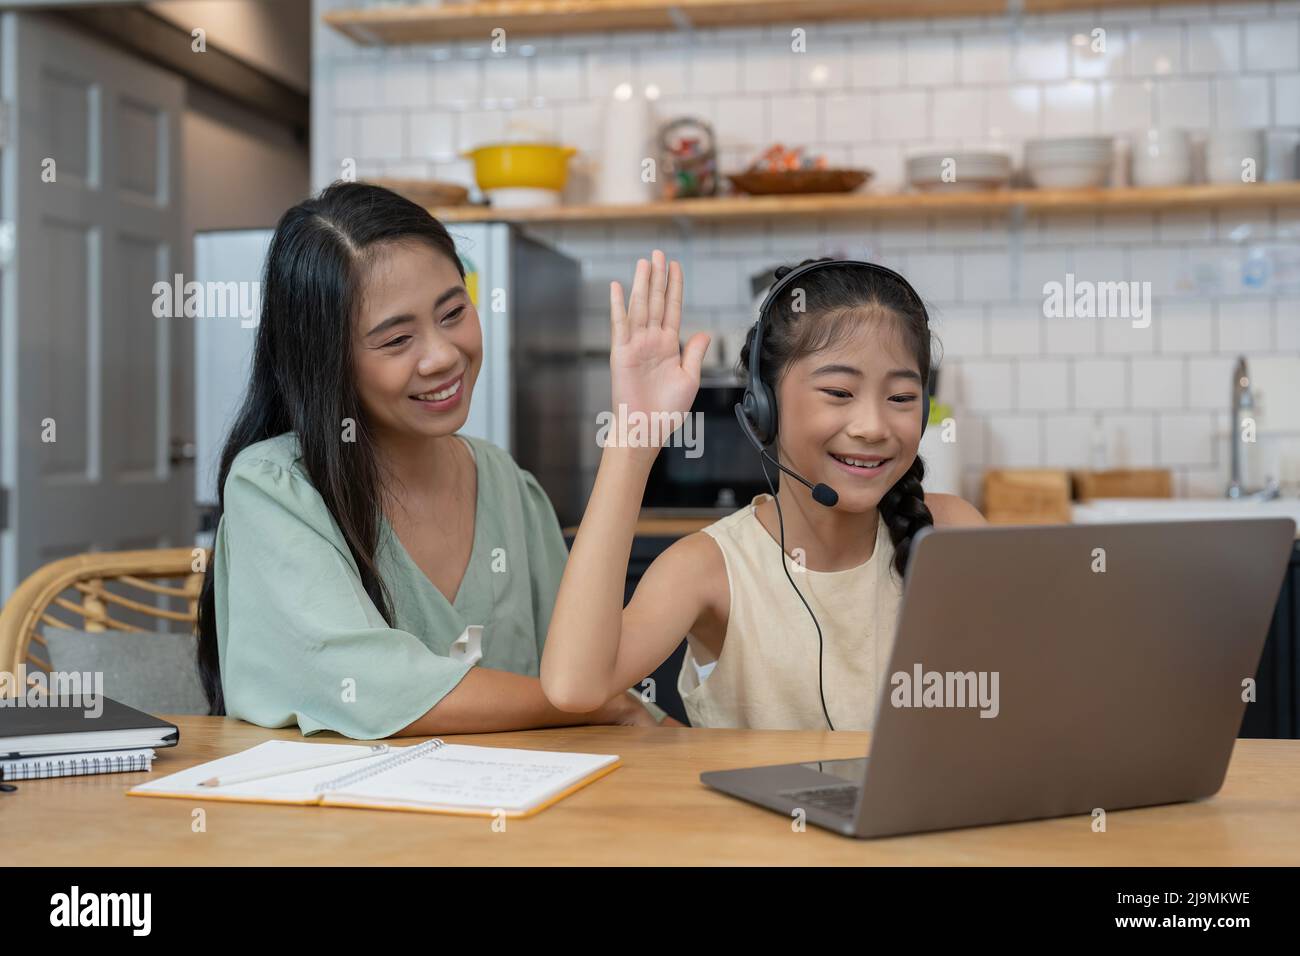 Happy asian mother and child sitting at kitchen table with colored pencils, attending virtual drawing class via video call, smiling and waving hello Stock Photo